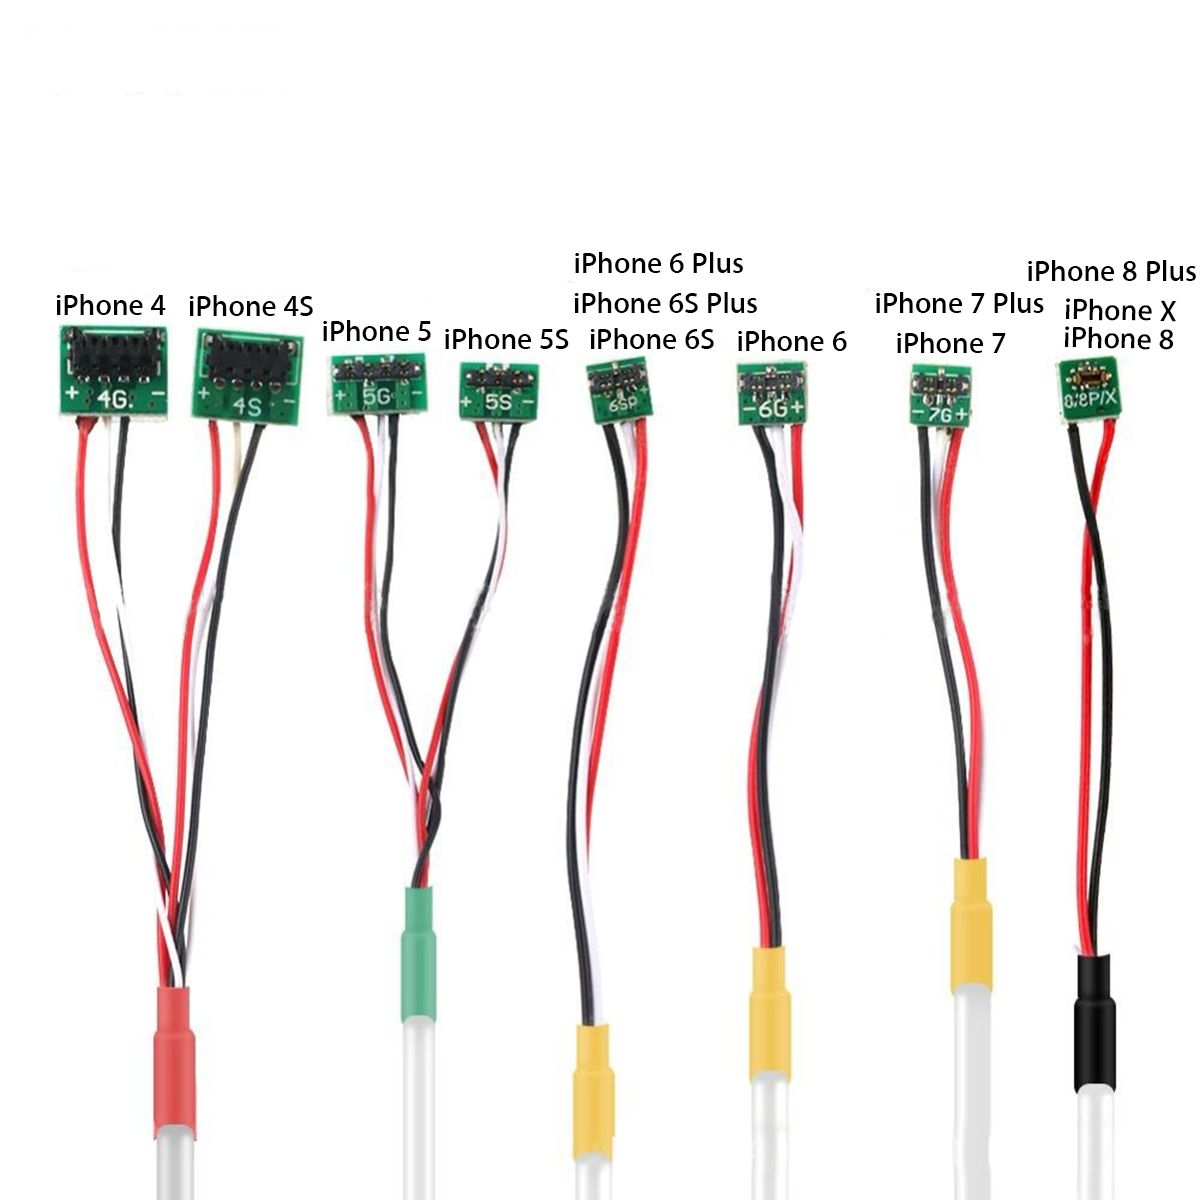 DC-Current-Power-Supply-Test-Cable-Handheld-Phone-Repair-for-iPhone-4-5-6-7-8-X-1433055